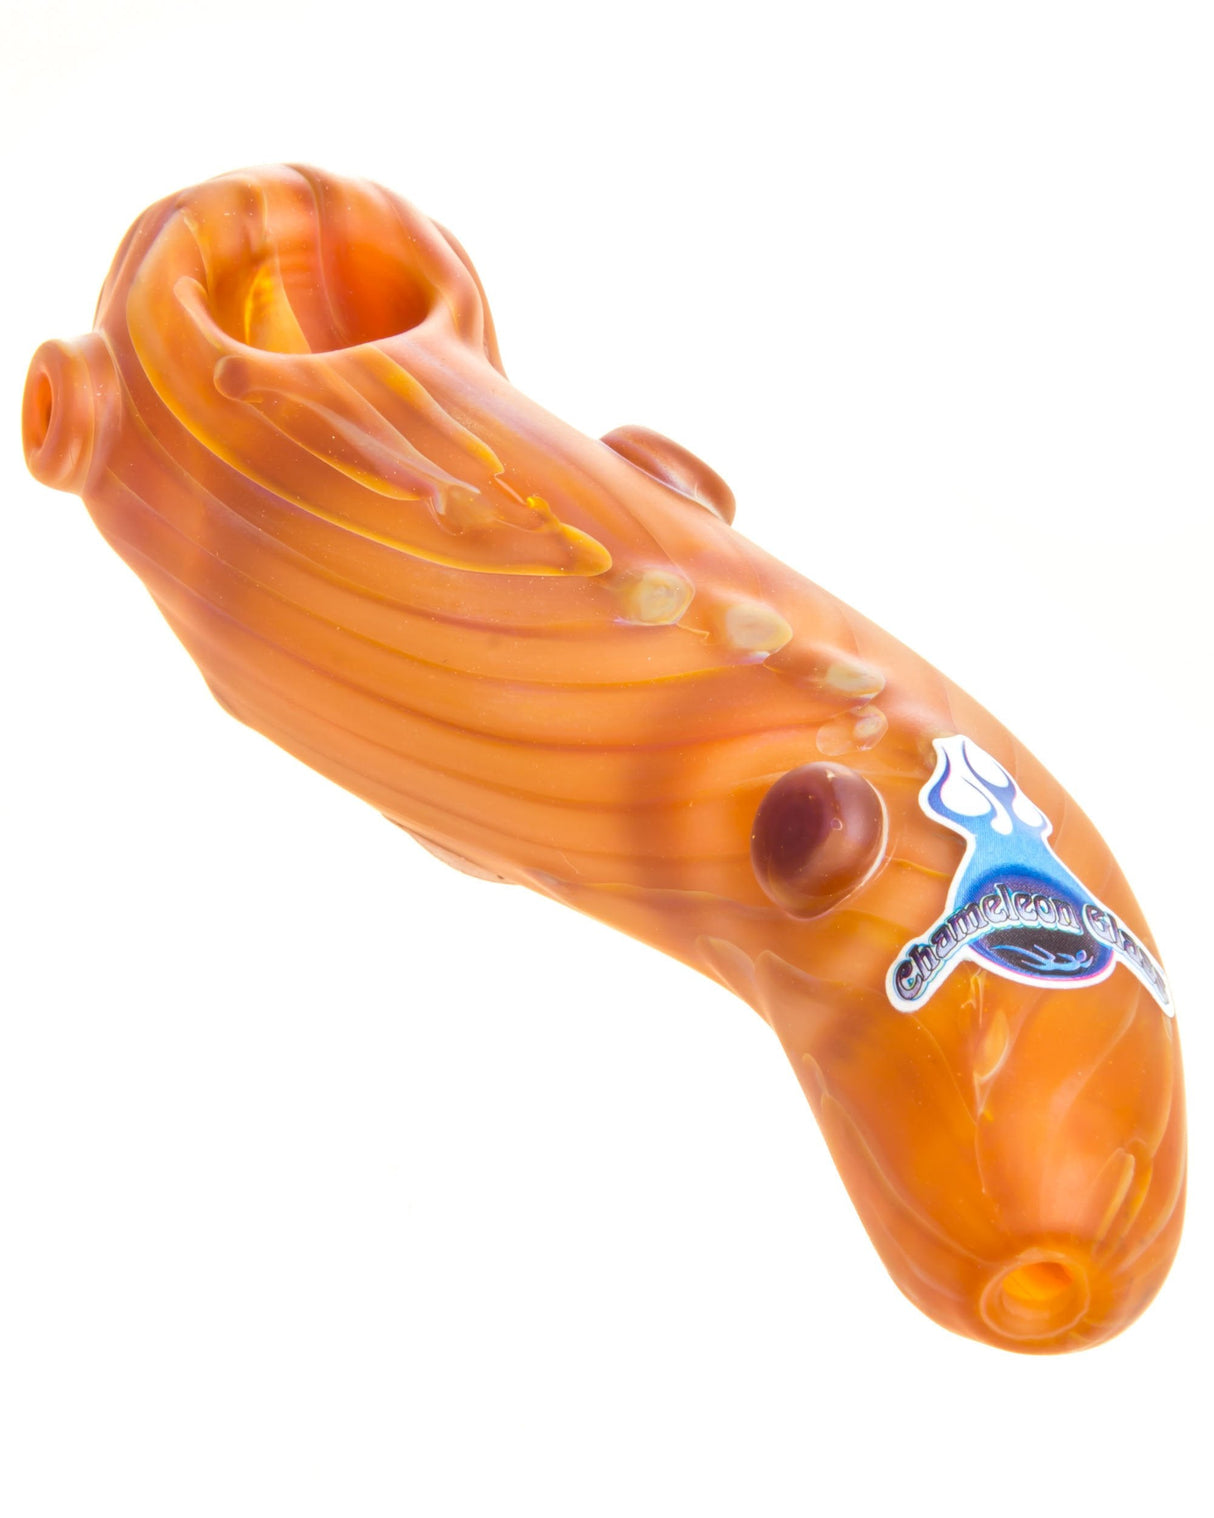 Chameleon Glass Smoking Tree Pipe in Borosilicate Glass, Small Size, Angled Side View